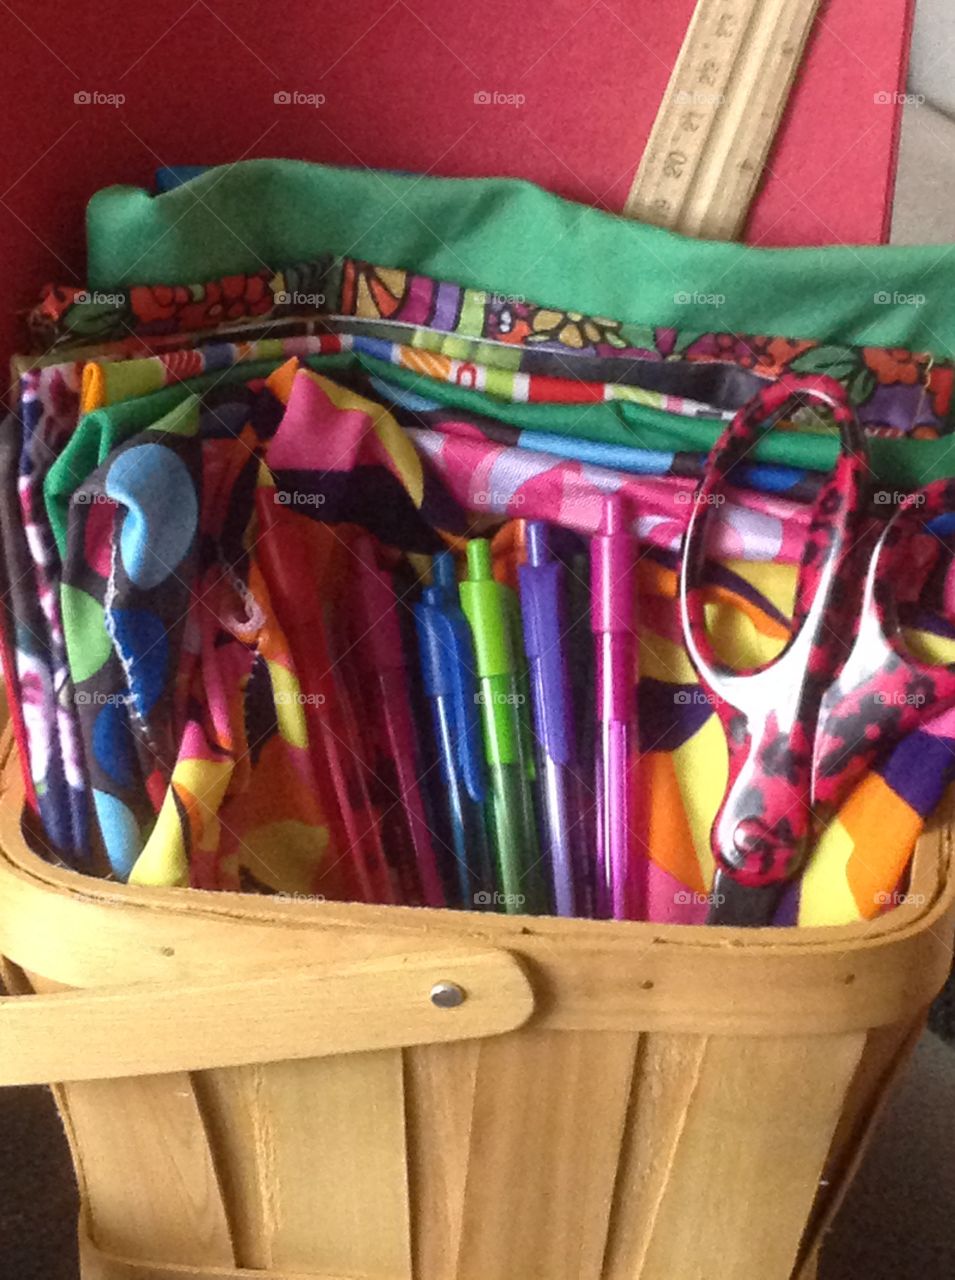 Fabrics, pens and scissors on a basket for art supplies.